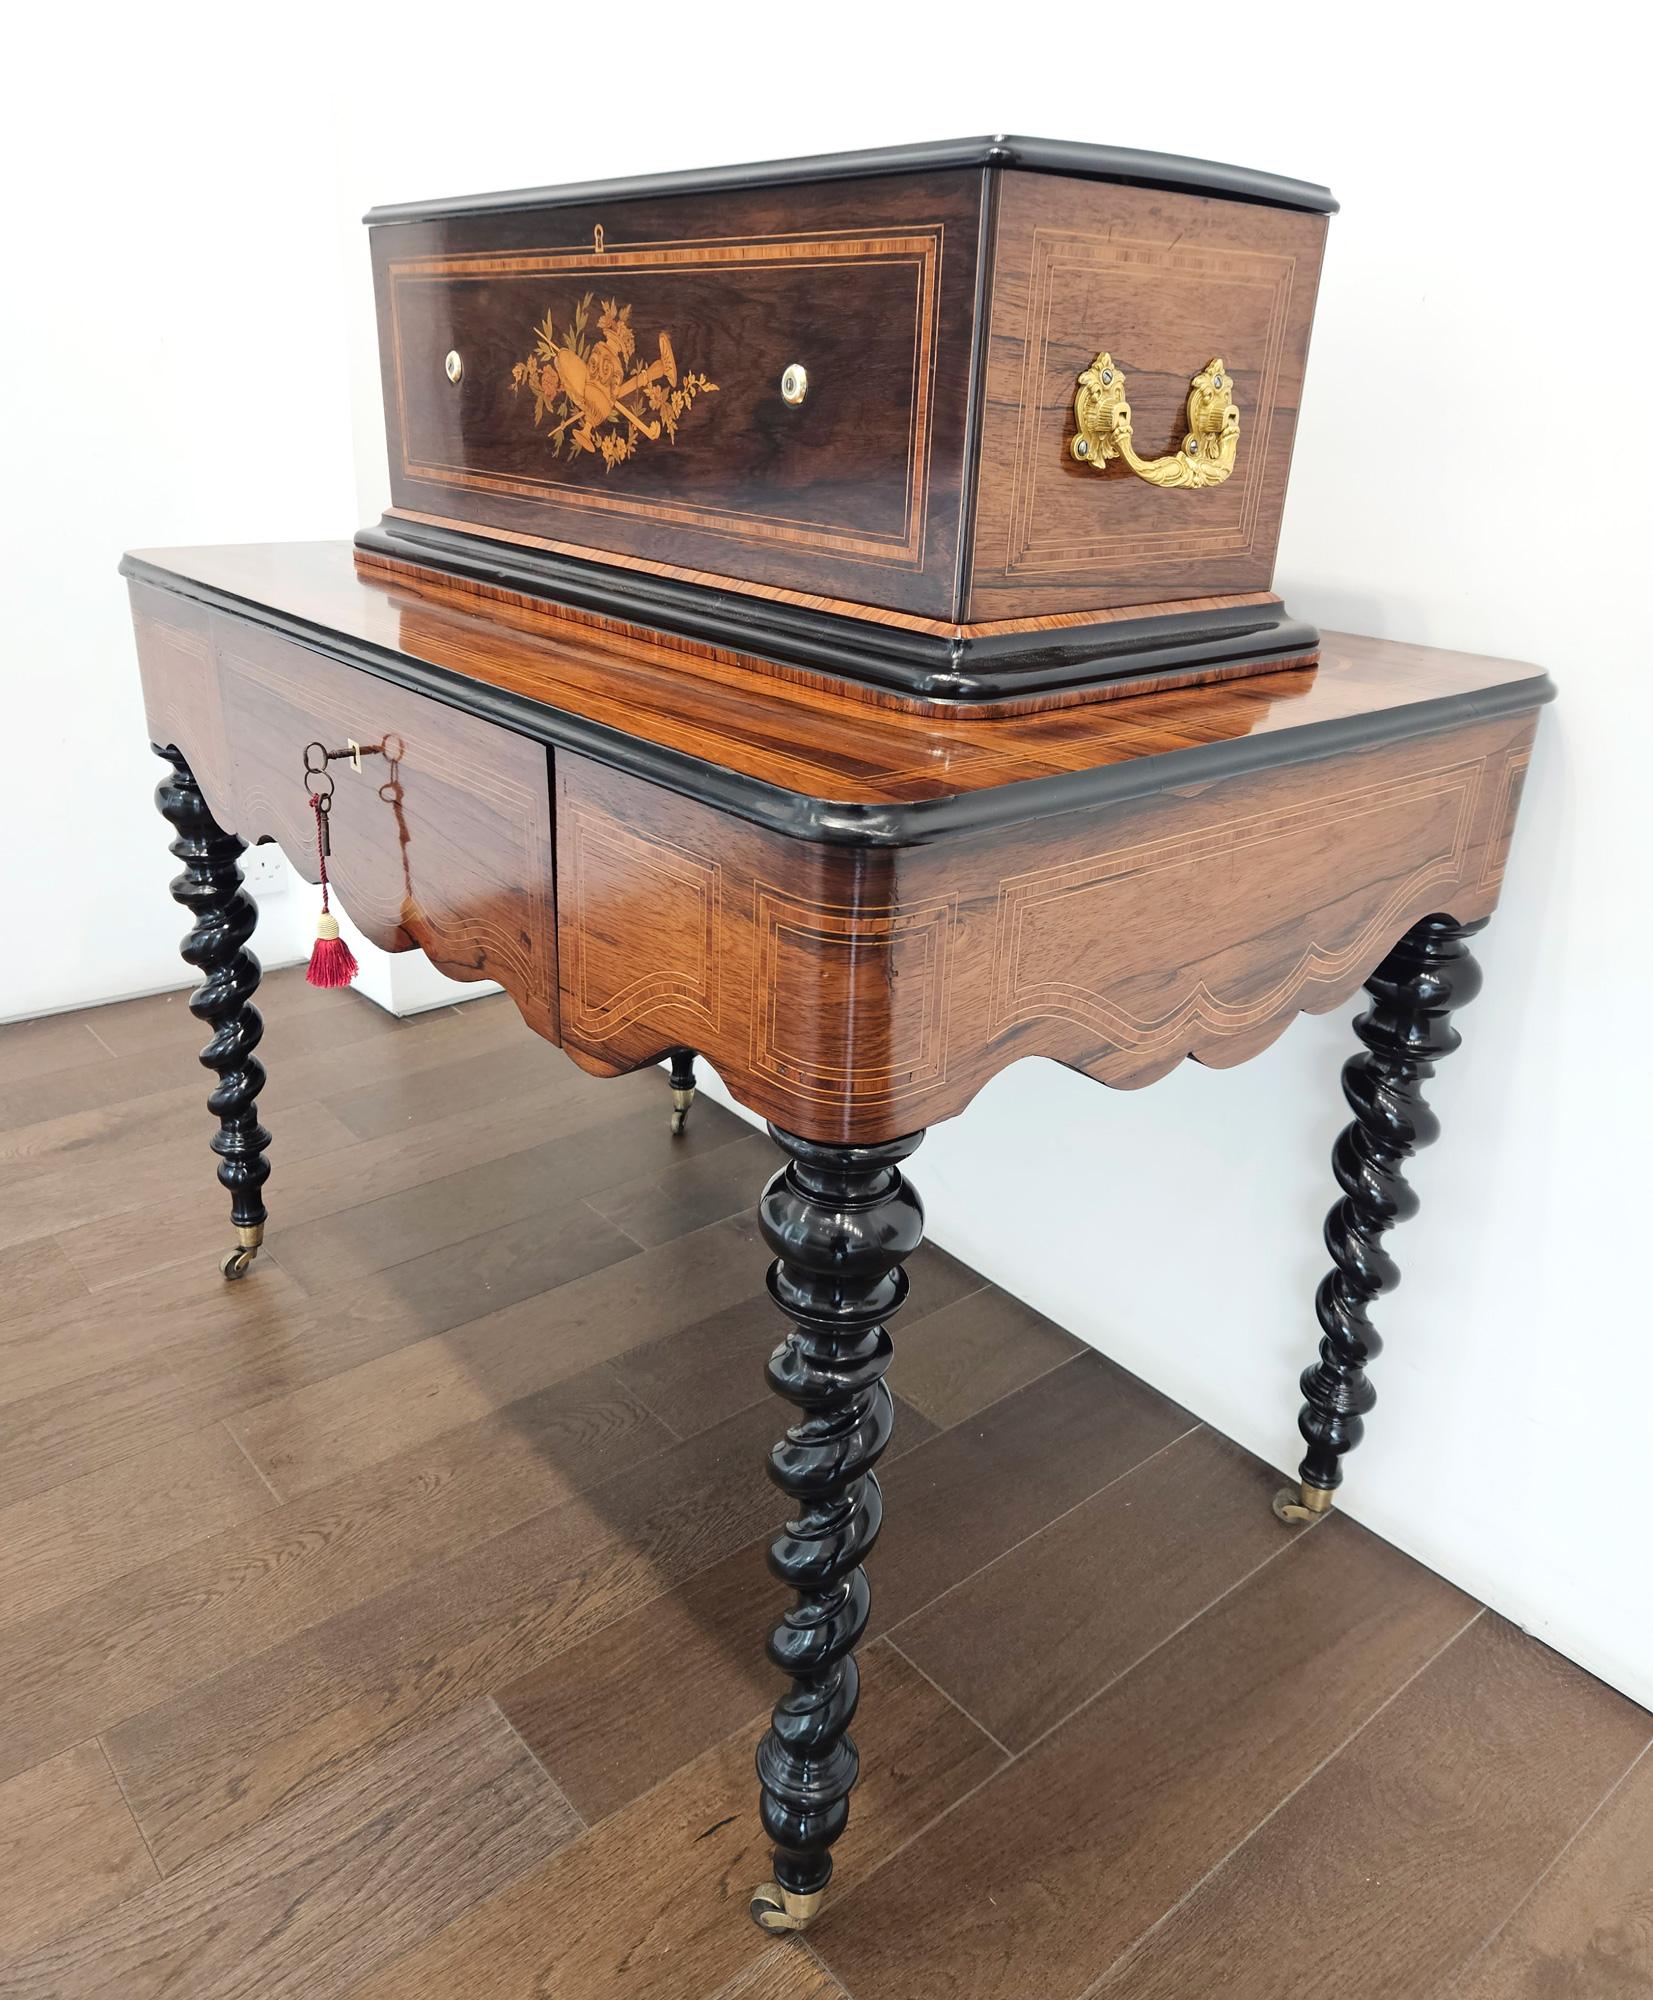 Antique 9 Bell Interchangeable Music Box on Table by Nicole Freres, c. 1870 For Sale 4